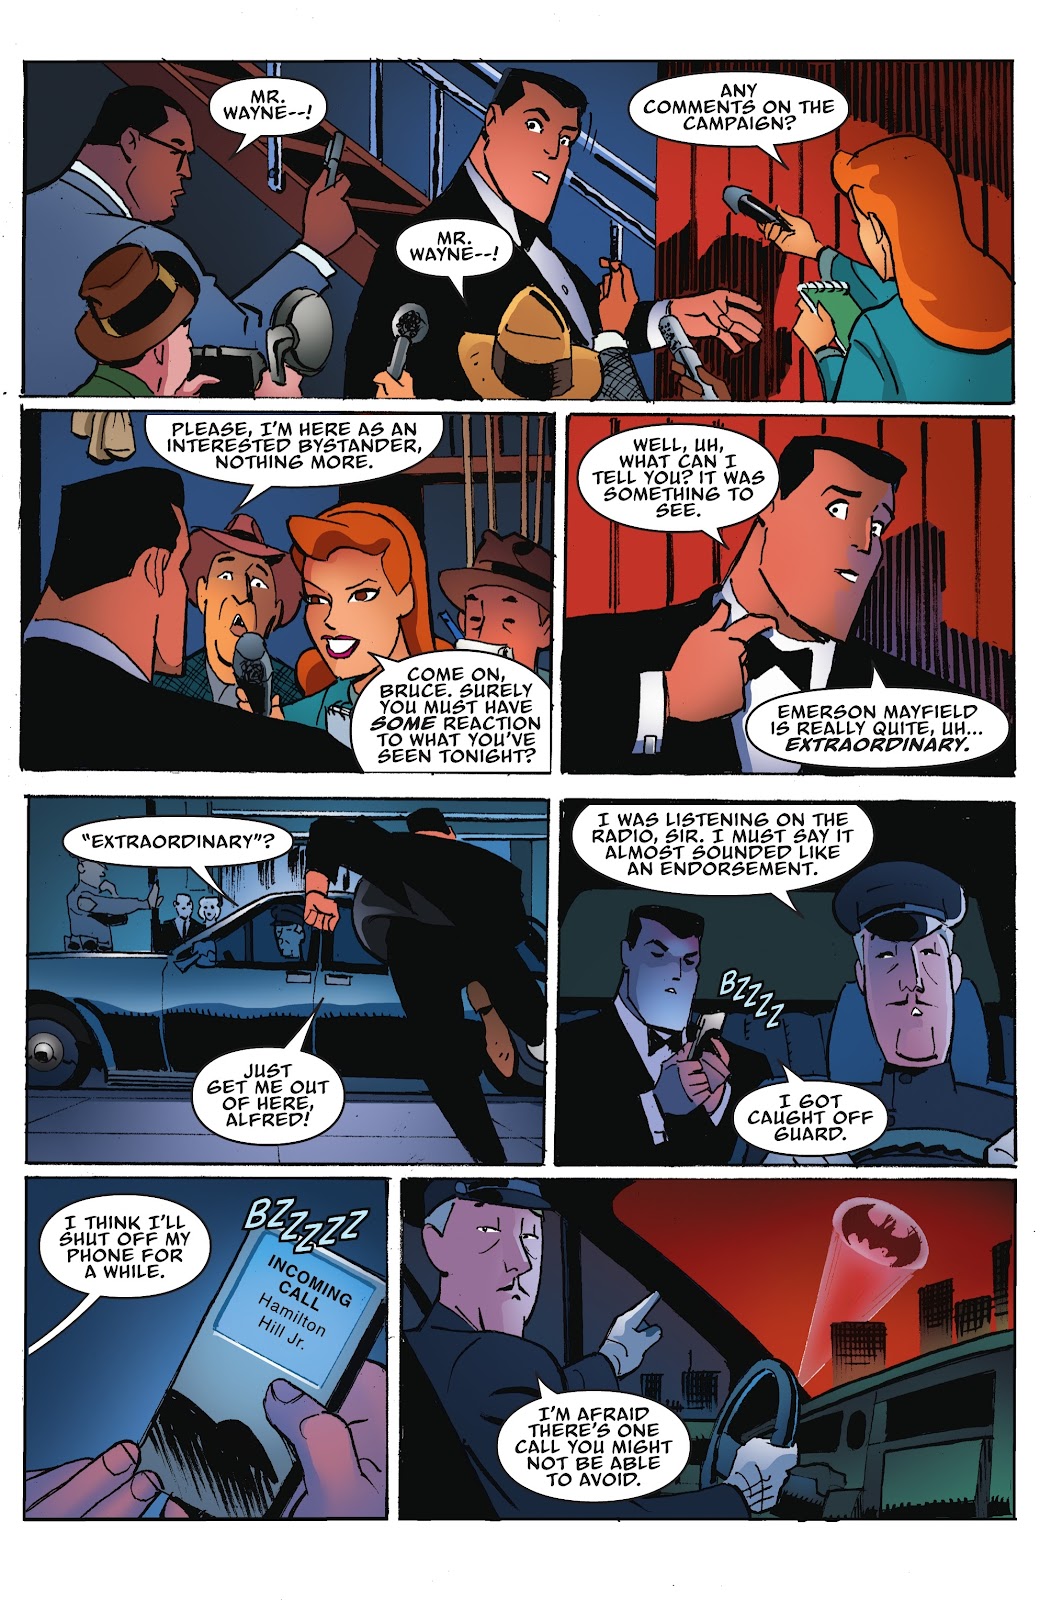 Batman: The Adventures Continue: Season Two issue 6 - Page 11